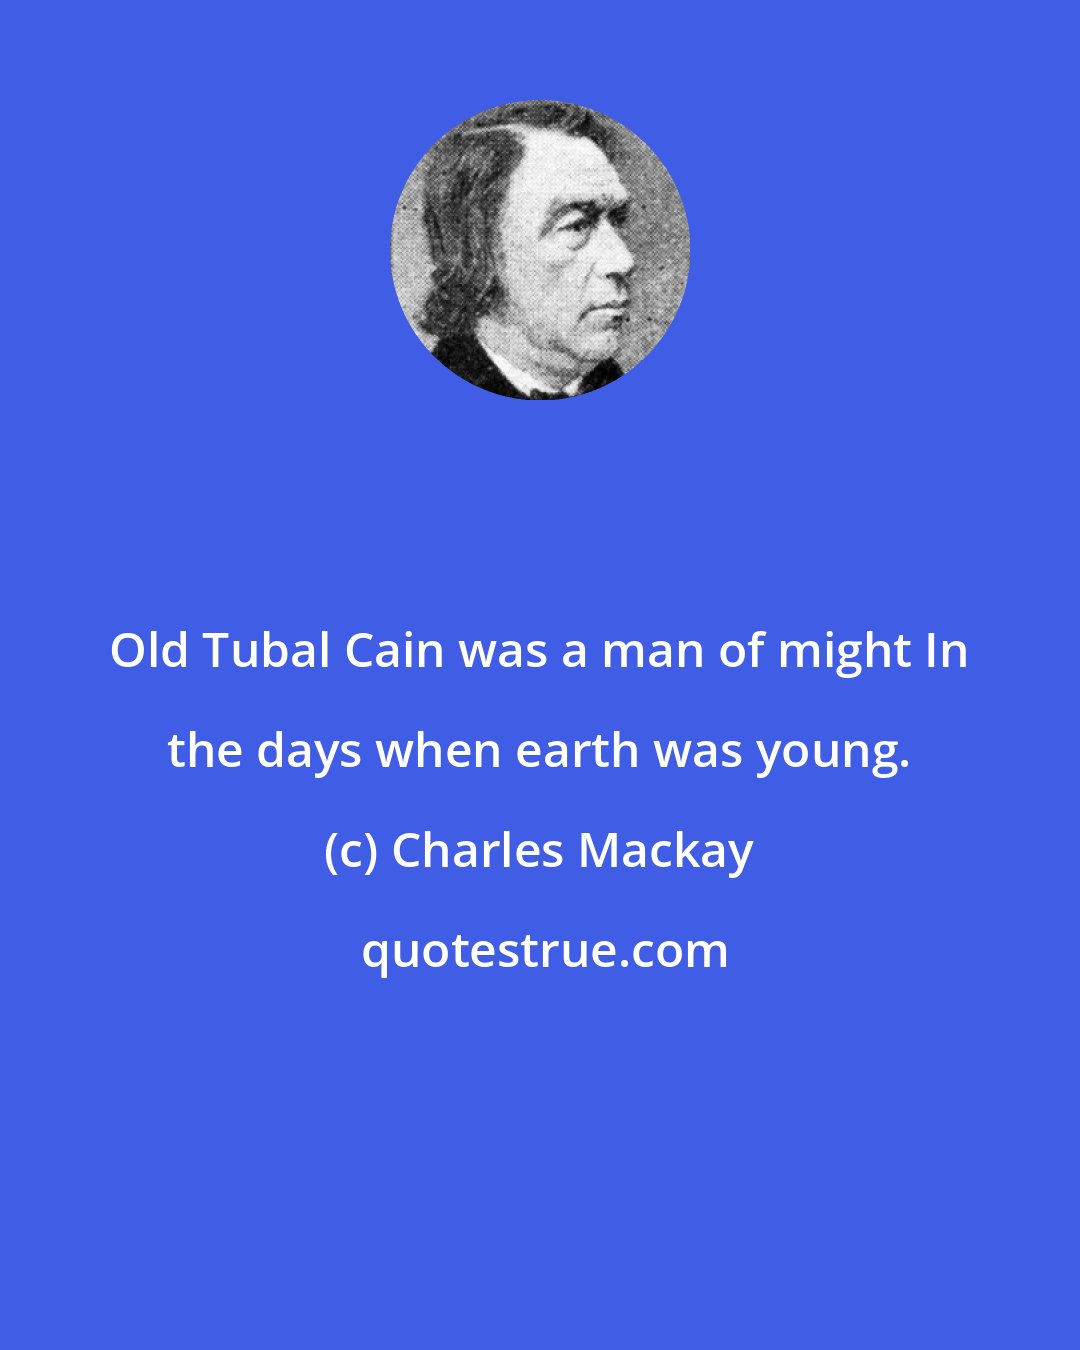 Charles Mackay: Old Tubal Cain was a man of might In the days when earth was young.